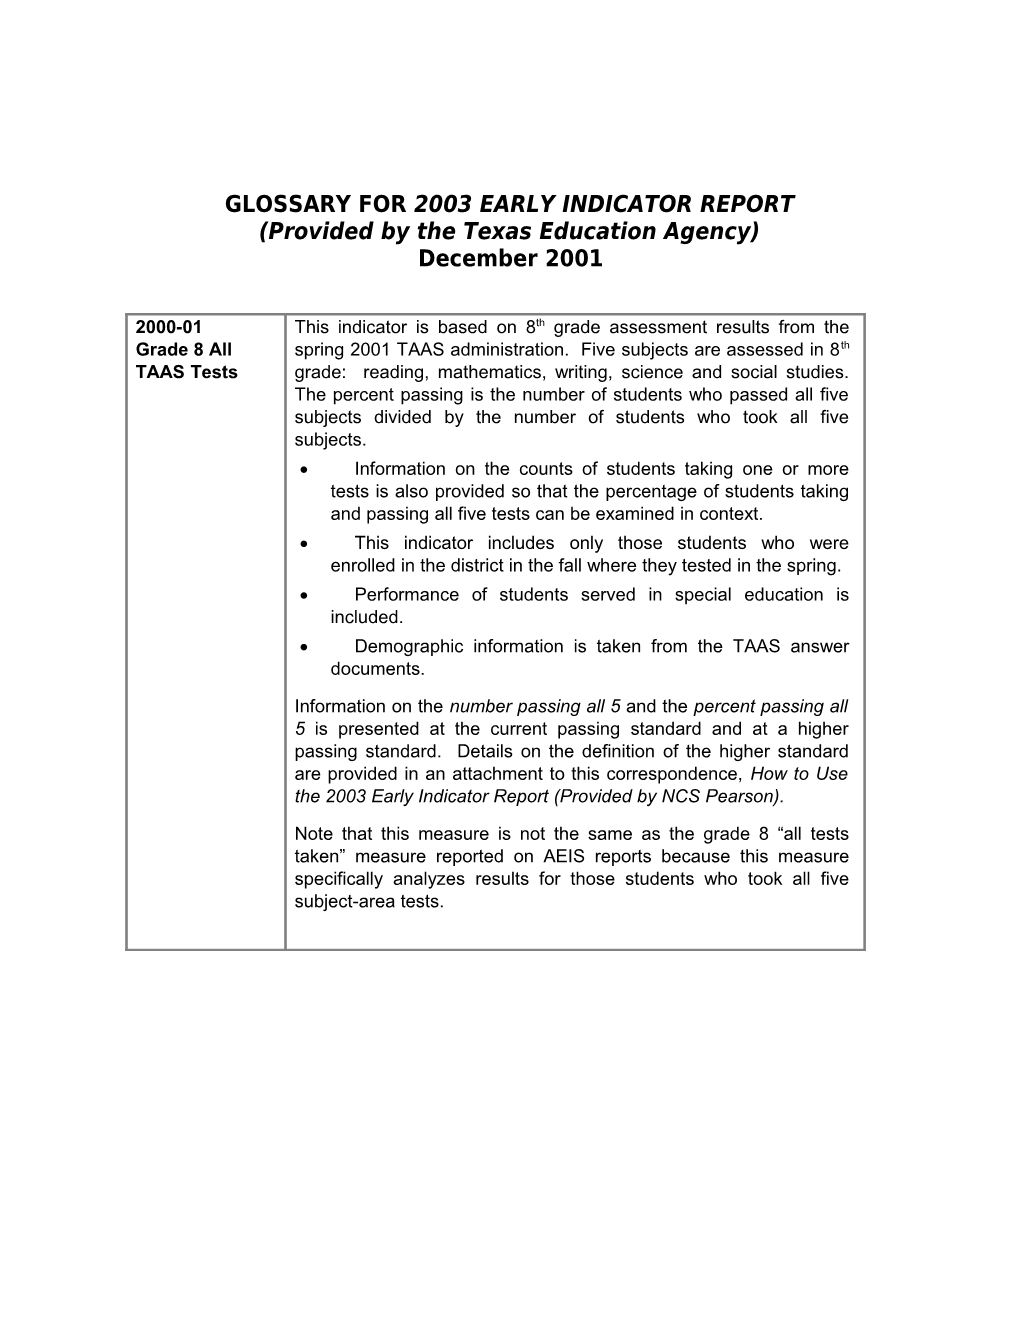 Glossary for 2003 Early Indicator Report